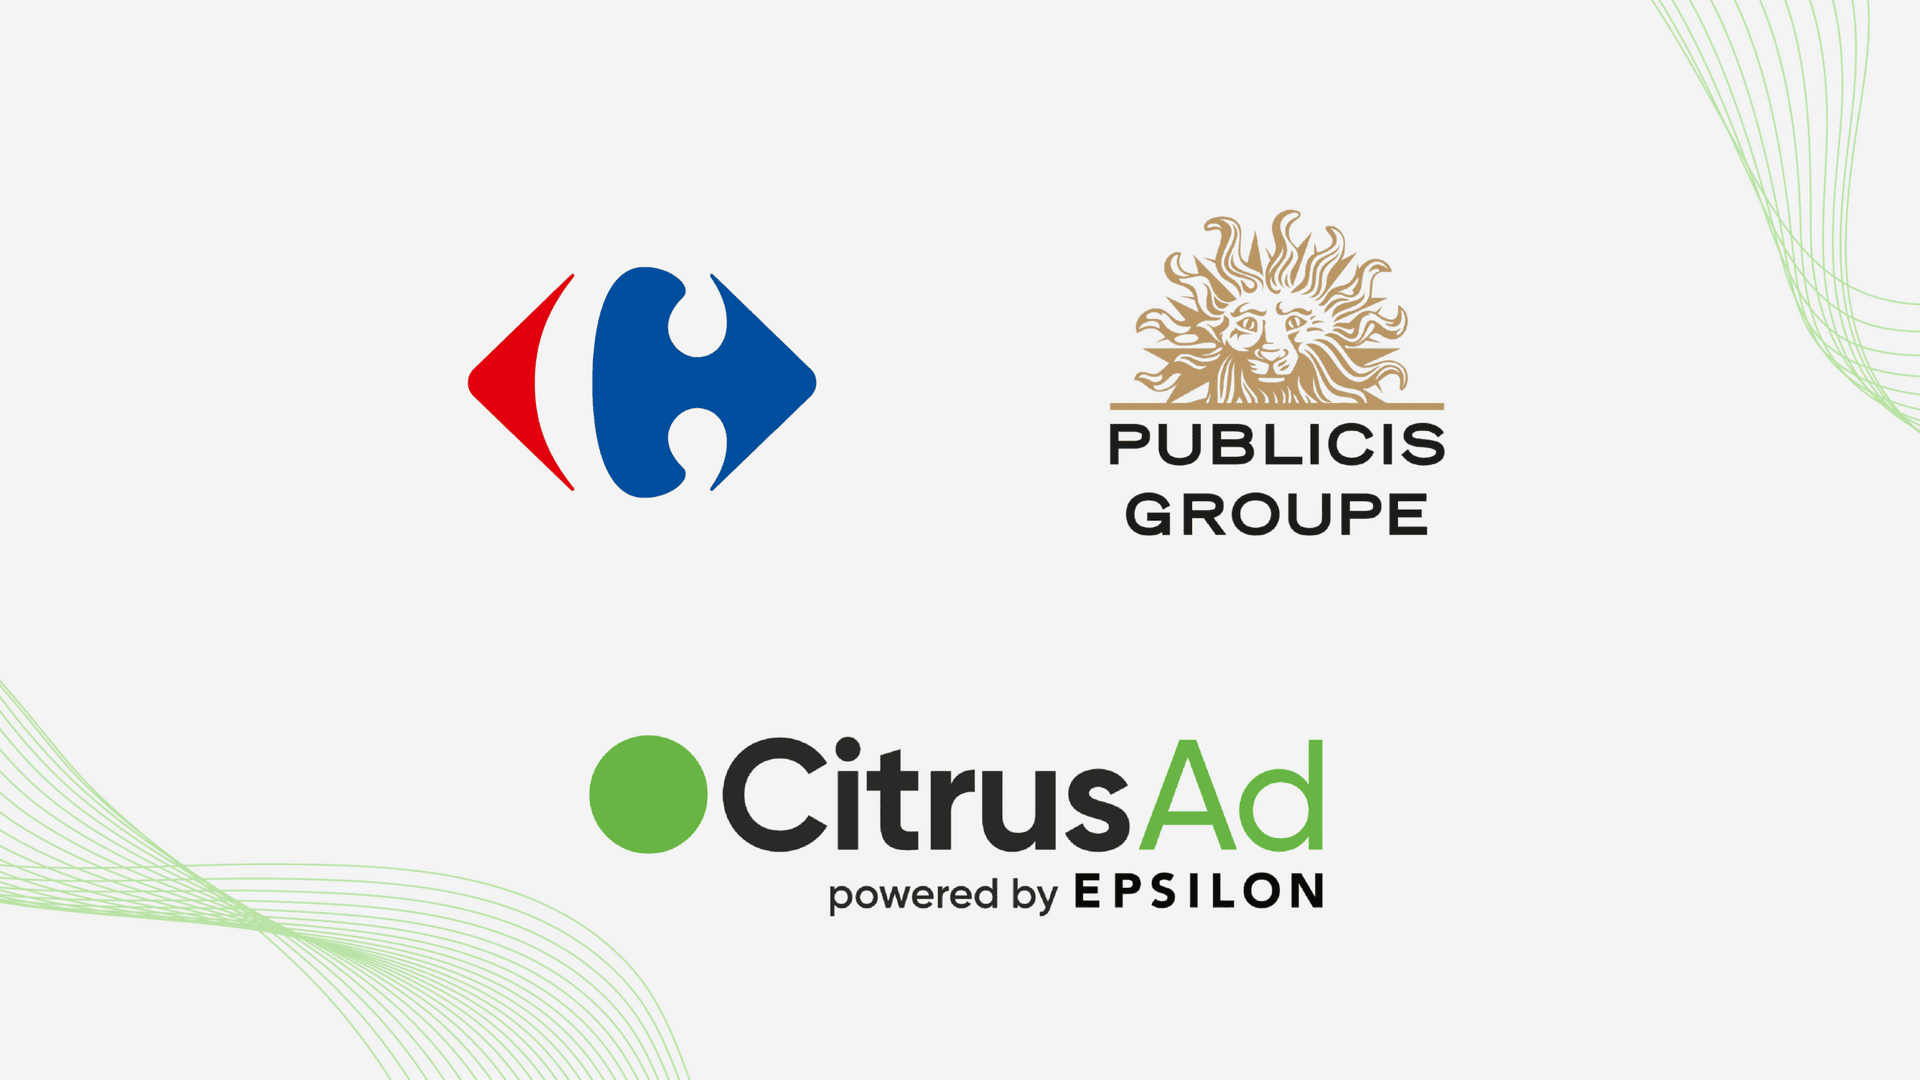 Carrefour and Publicis join forces to create a leader in the European and Latin American retail media market.